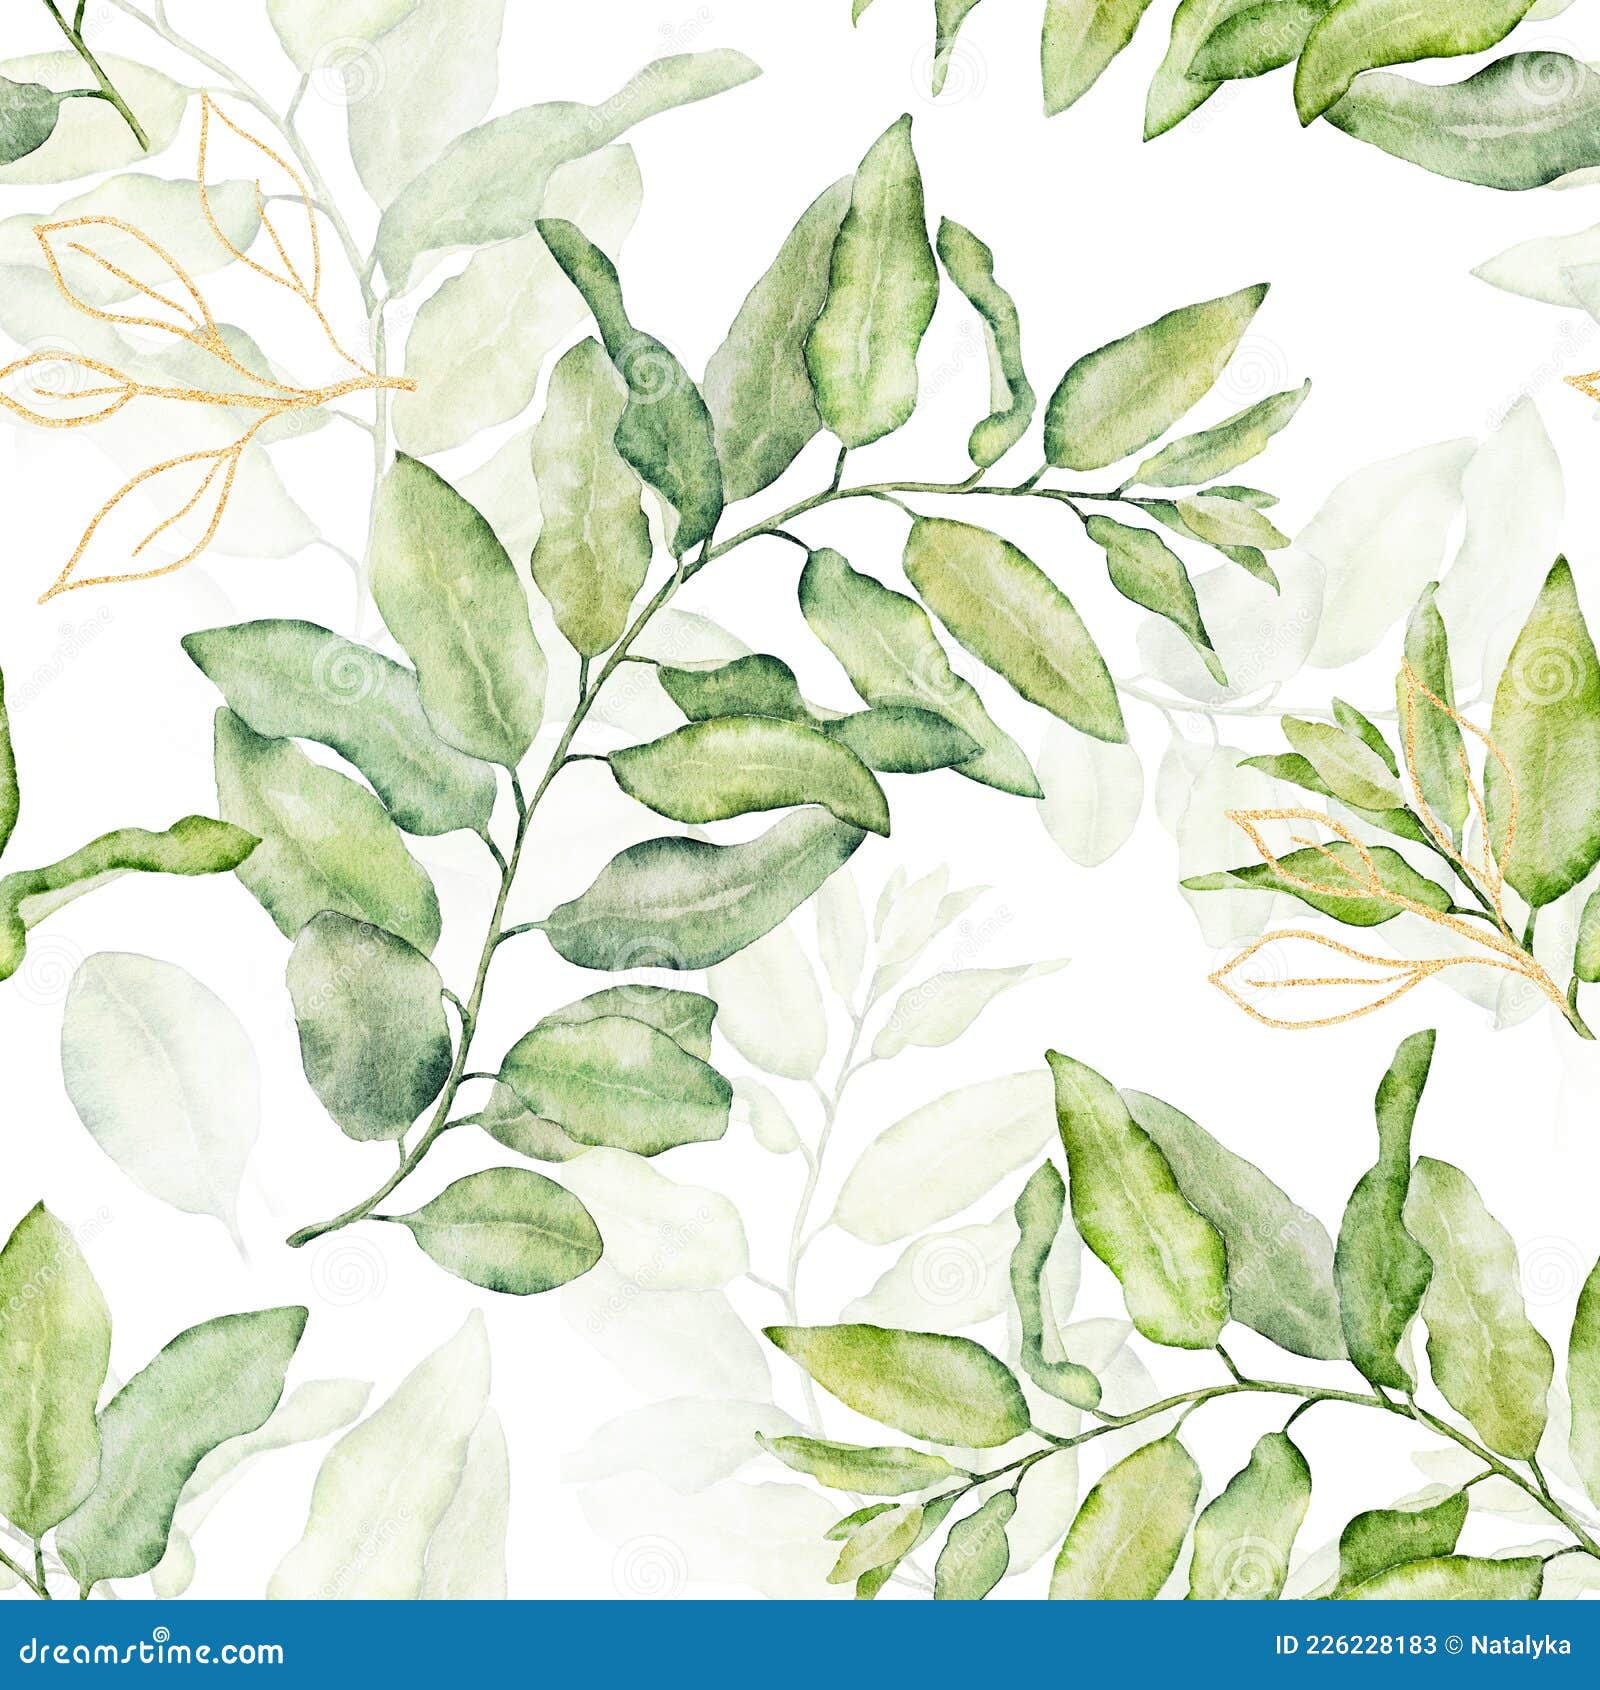 Watercolor Seamless Floral Pattern with Green and Gold Leaves on White  Background Stock Illustration - Illustration of background, card: 226228183